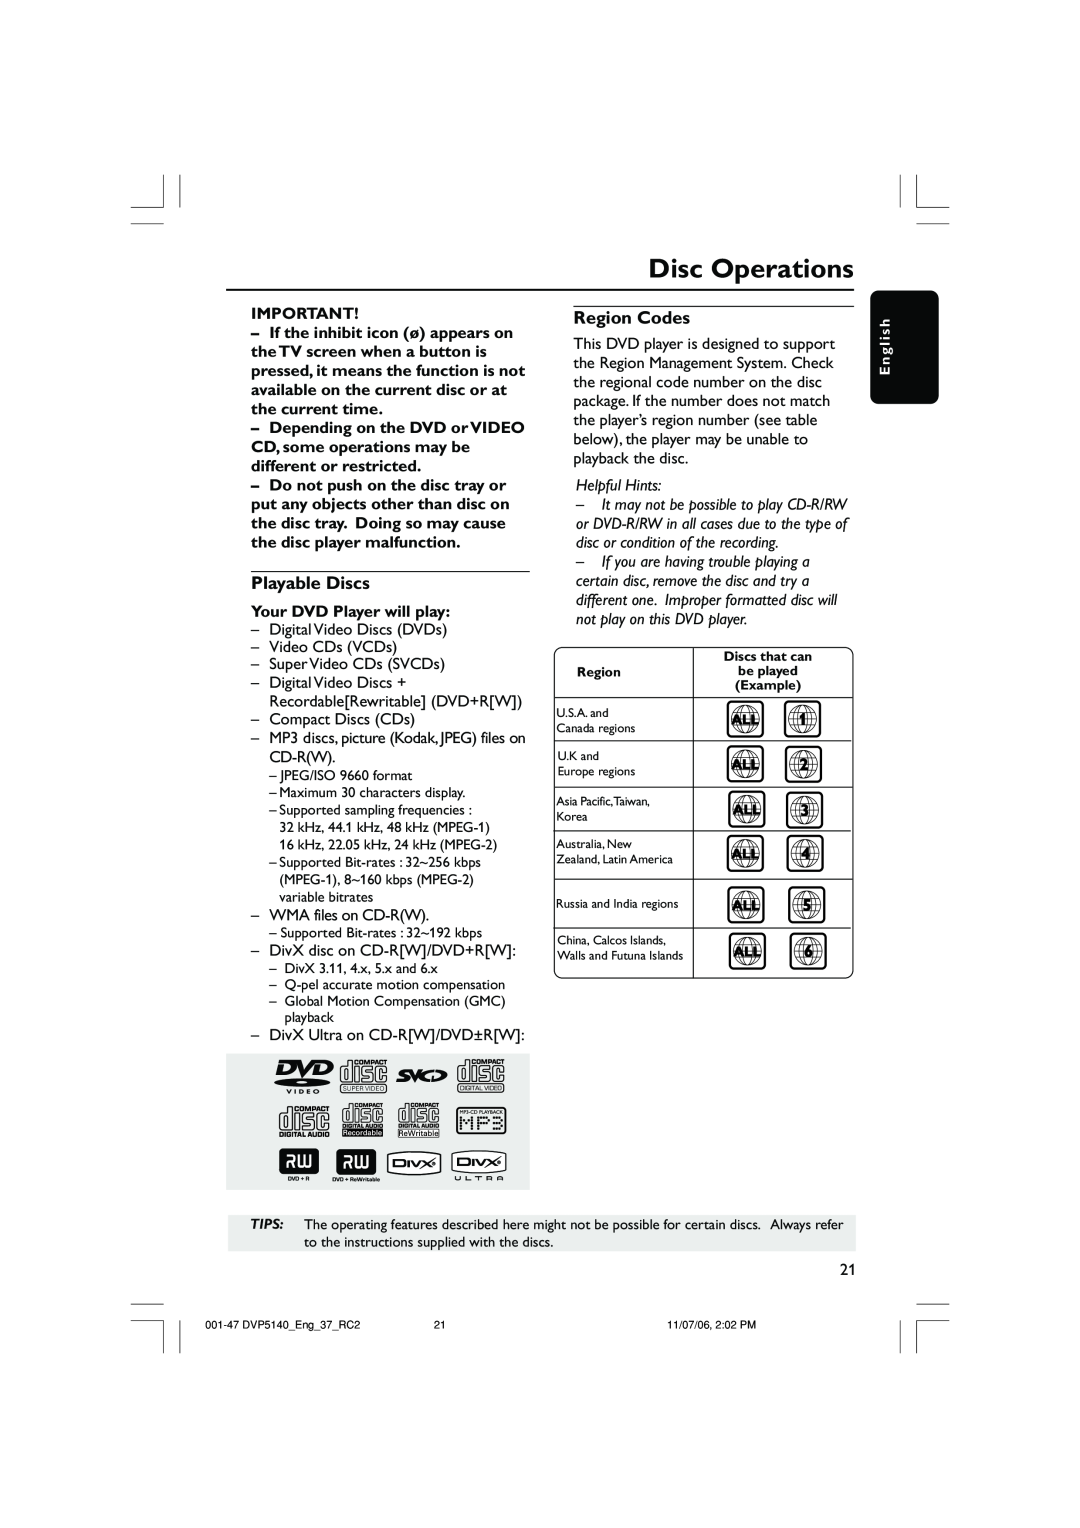 Philips DVP5140 user manual Disc Operations, Playable Discs, Region Codes, Your DVD Player will play, Helpful Hints 